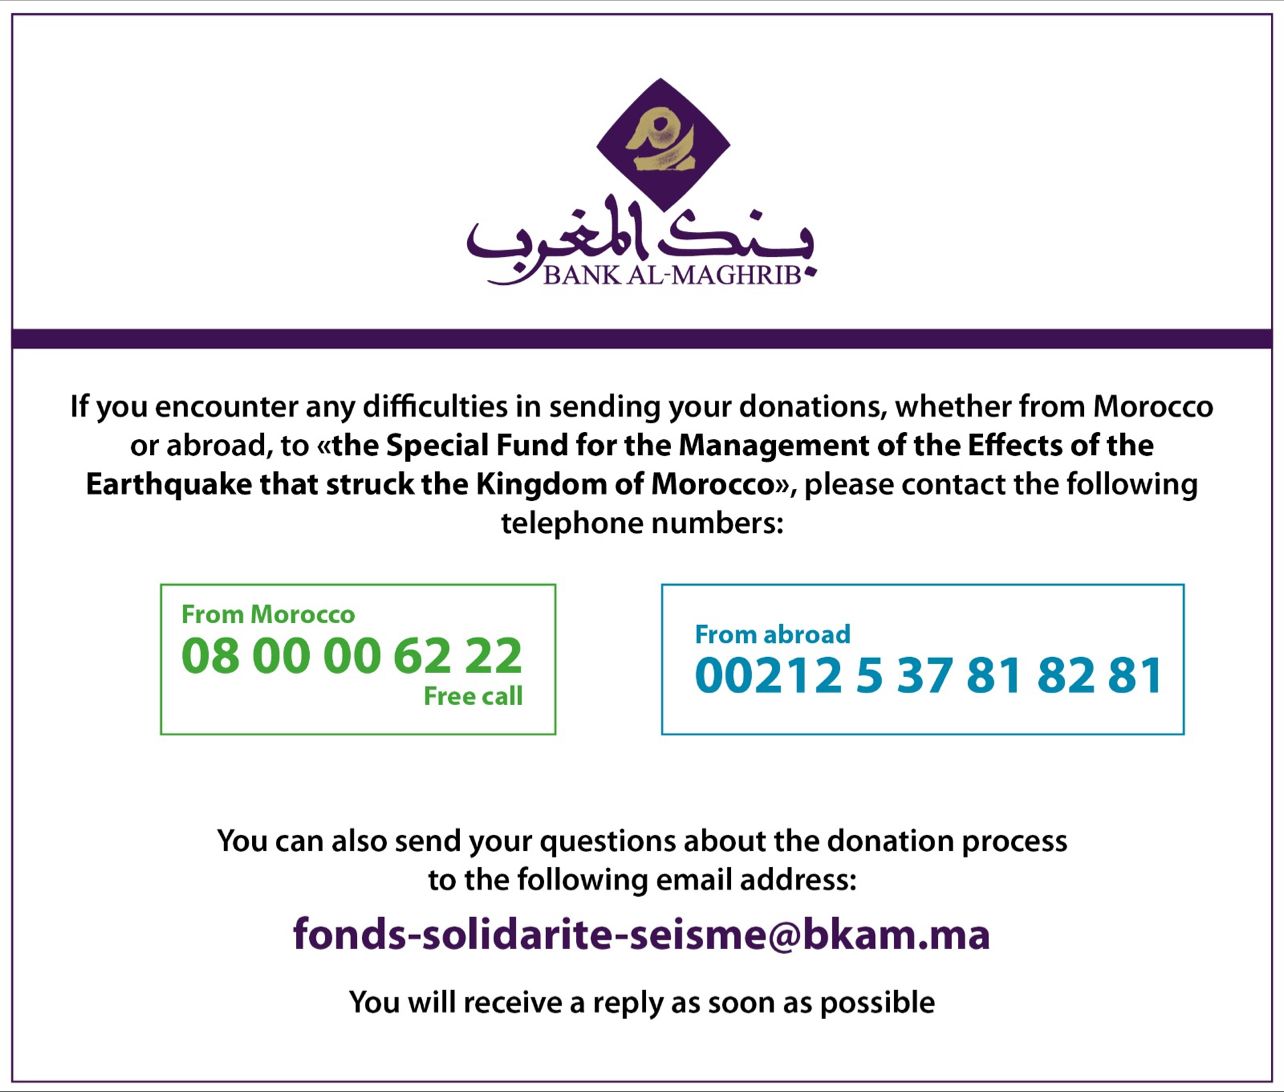 Bank Al Maghreb's difficulties email